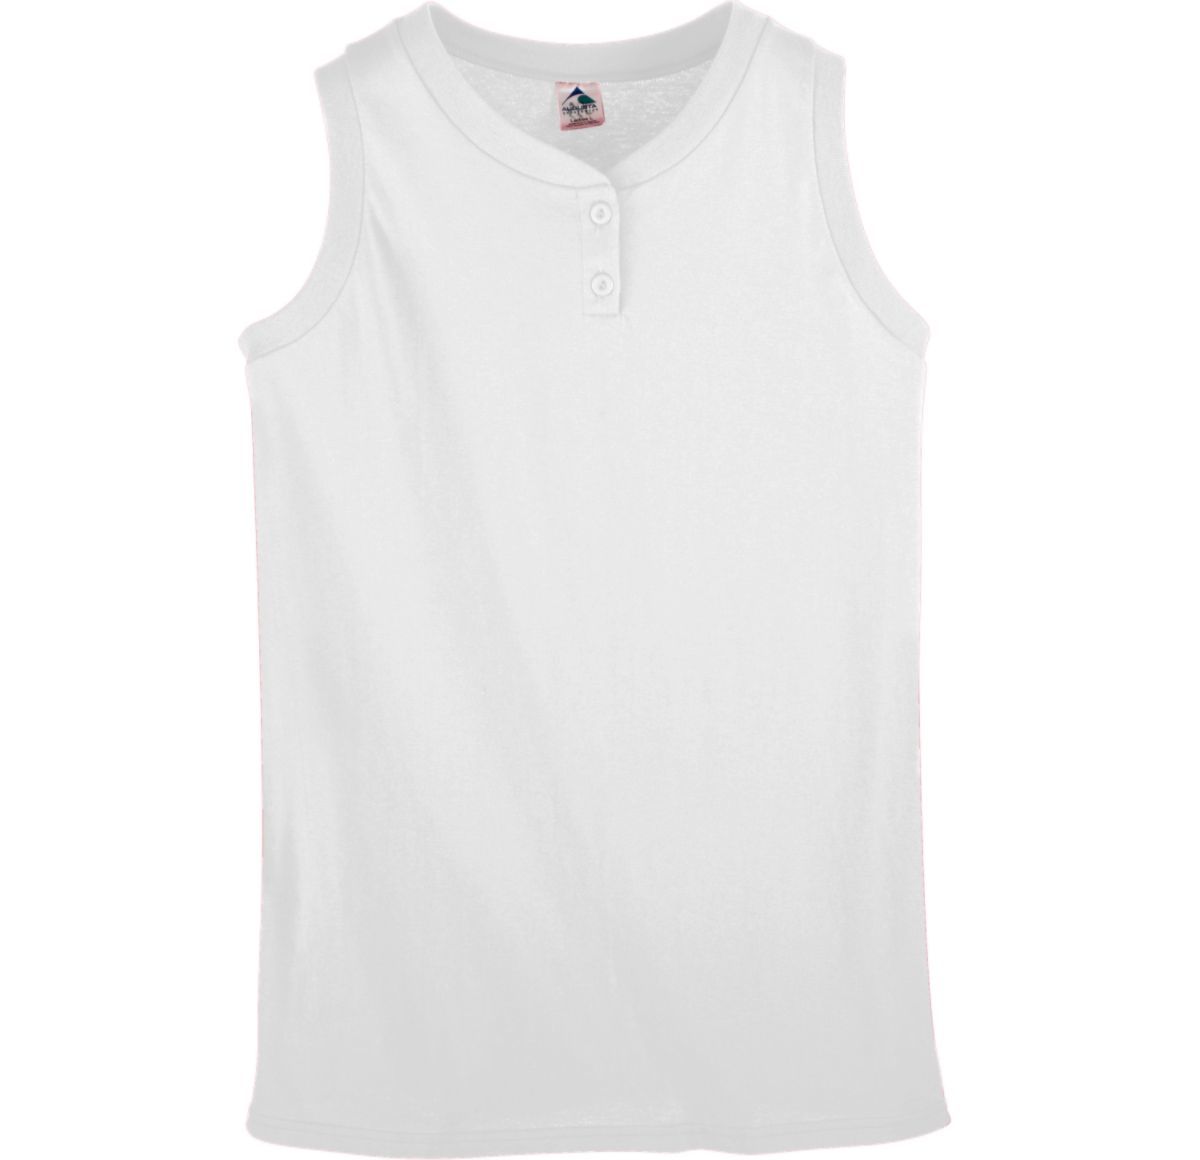 Augusta Sportswear Girls Sleeveless Two-Button Softball Jersey in White  -Part of the Girls, Augusta-Products, Softball, Girls-Jersey, Shirts product lines at KanaleyCreations.com